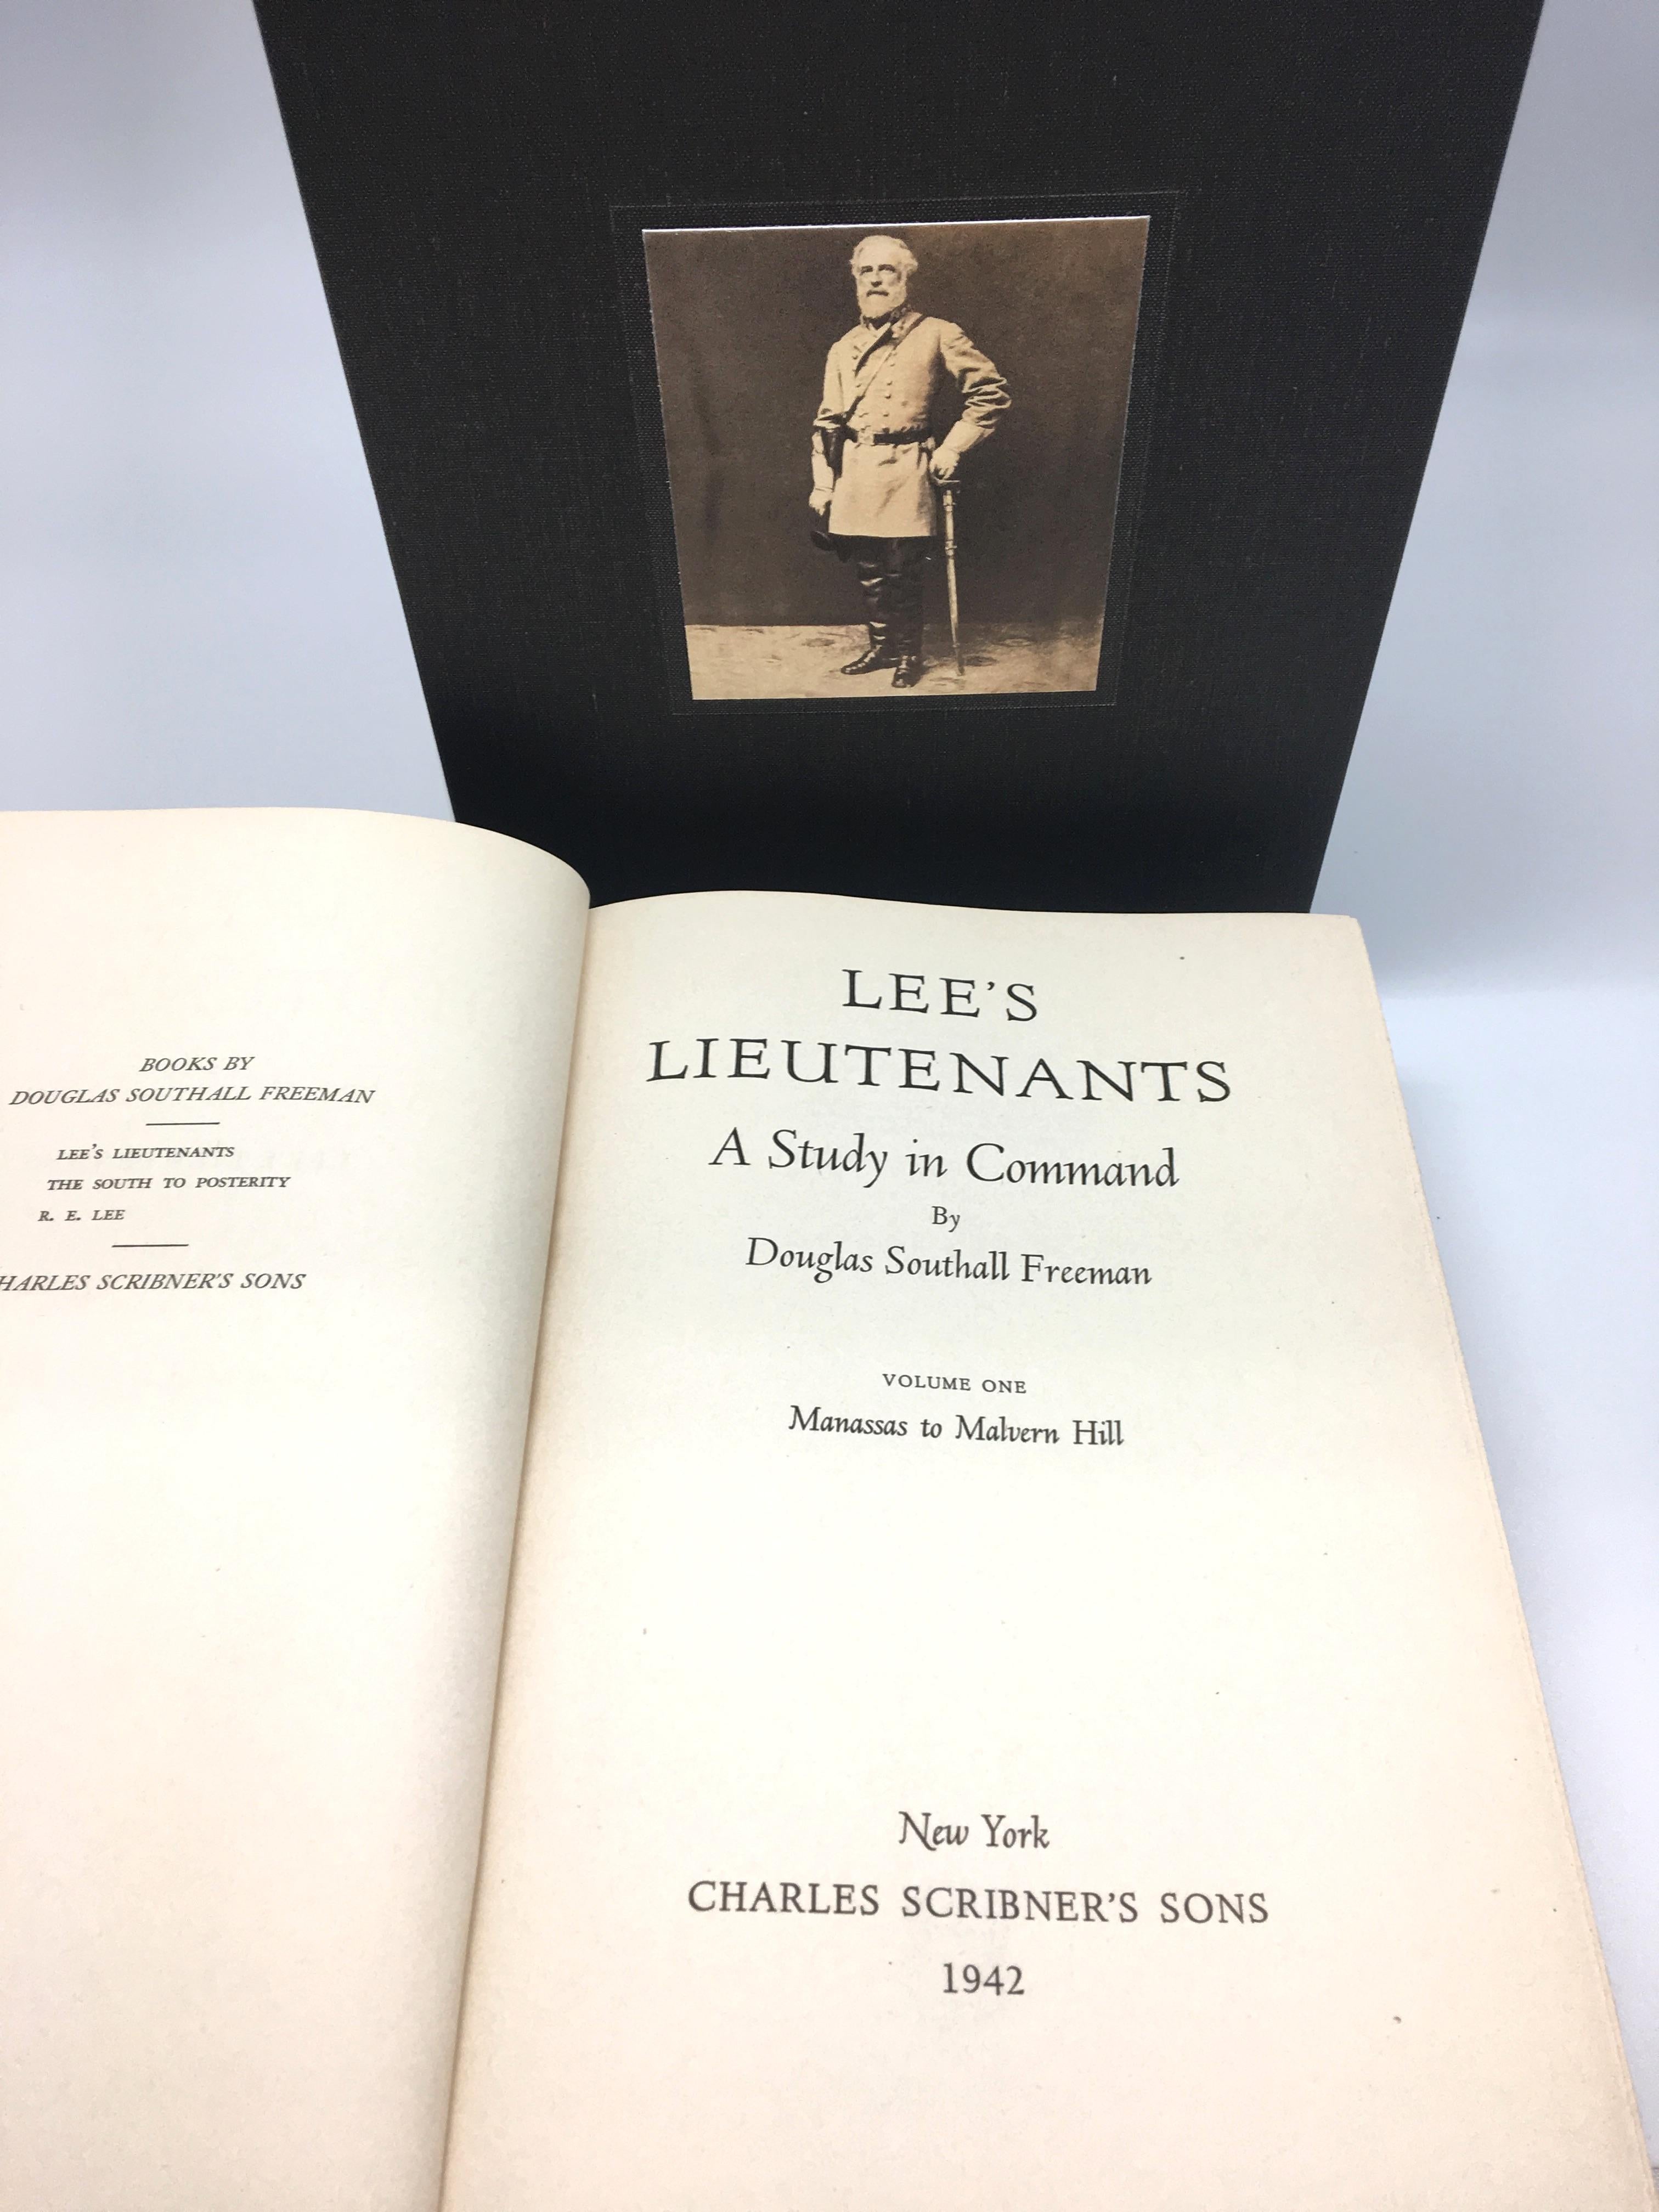 Freeman, Douglas Southall. Lee’s Lieutenants: A Study in Command. New York: Charles Scribner’s Sons, 1942. First edition signed by author. Three volume set in original dust jackets and presented in custom slipcase.

This first edition set of